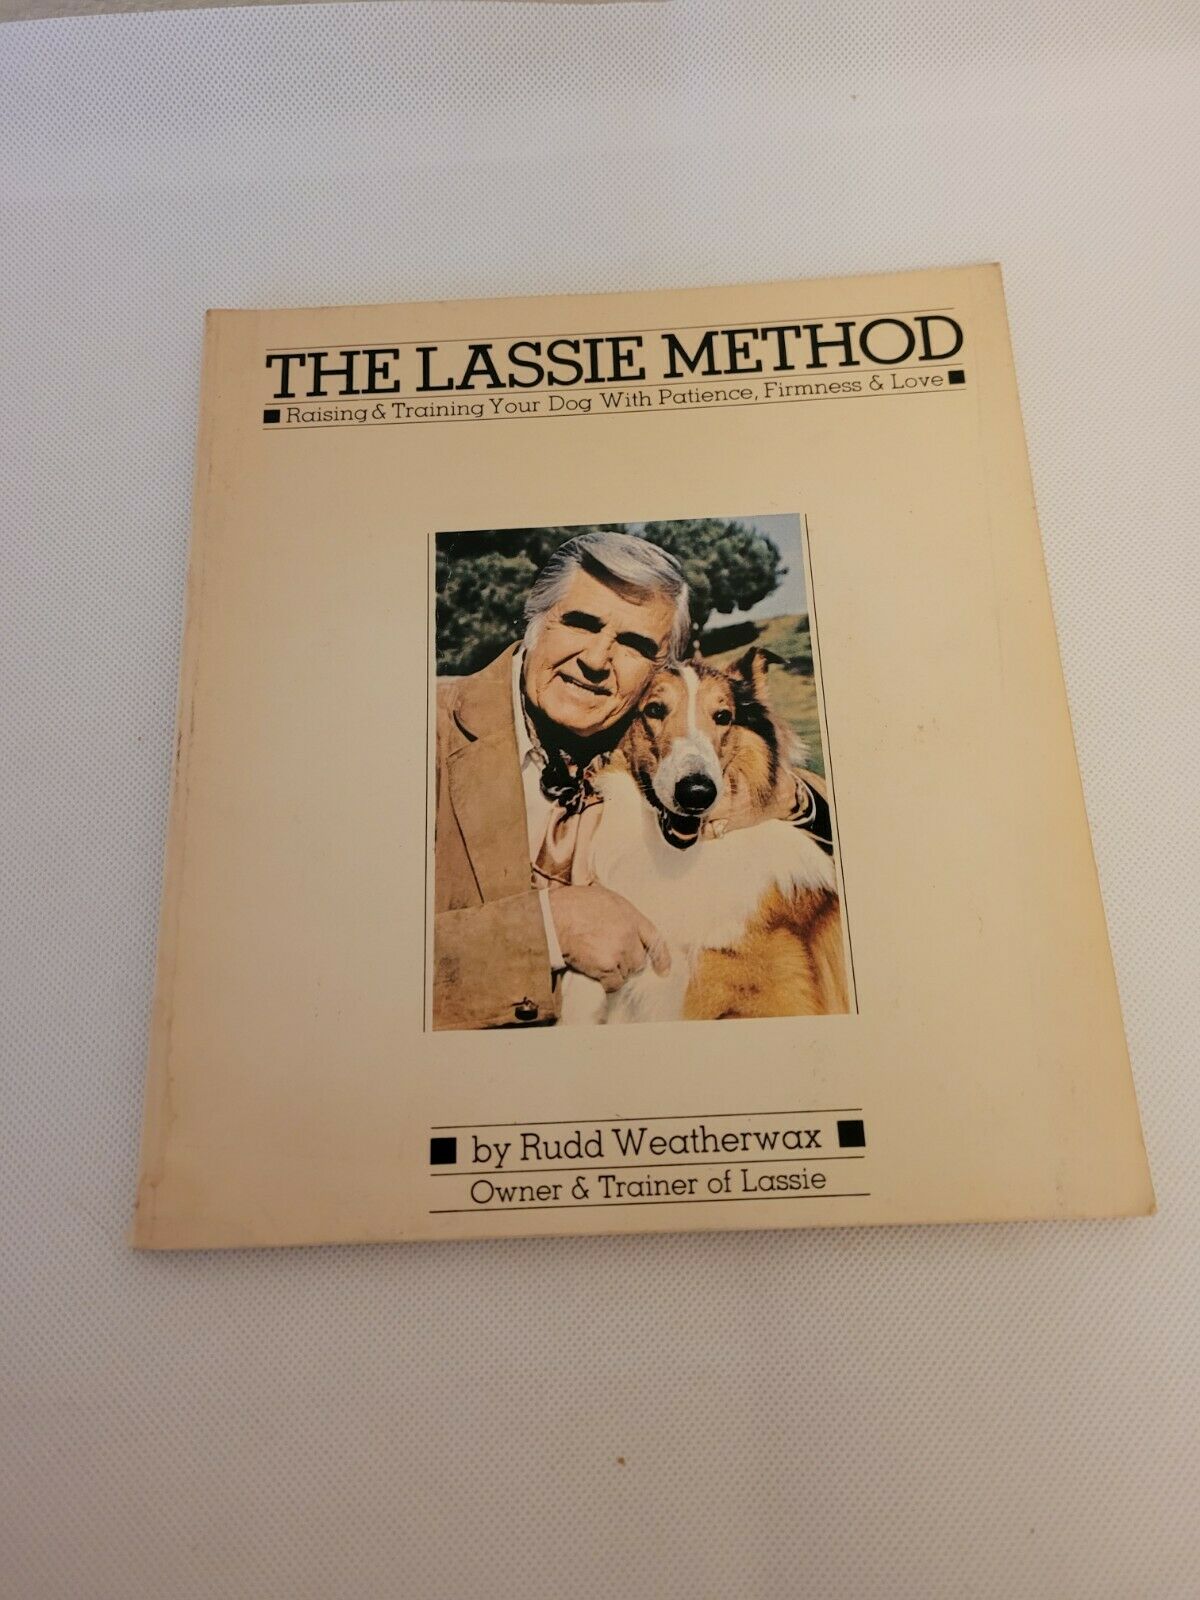 The Lassie Method Book Rudd Weatherwax Owner Trainer Of Lassie Softcover